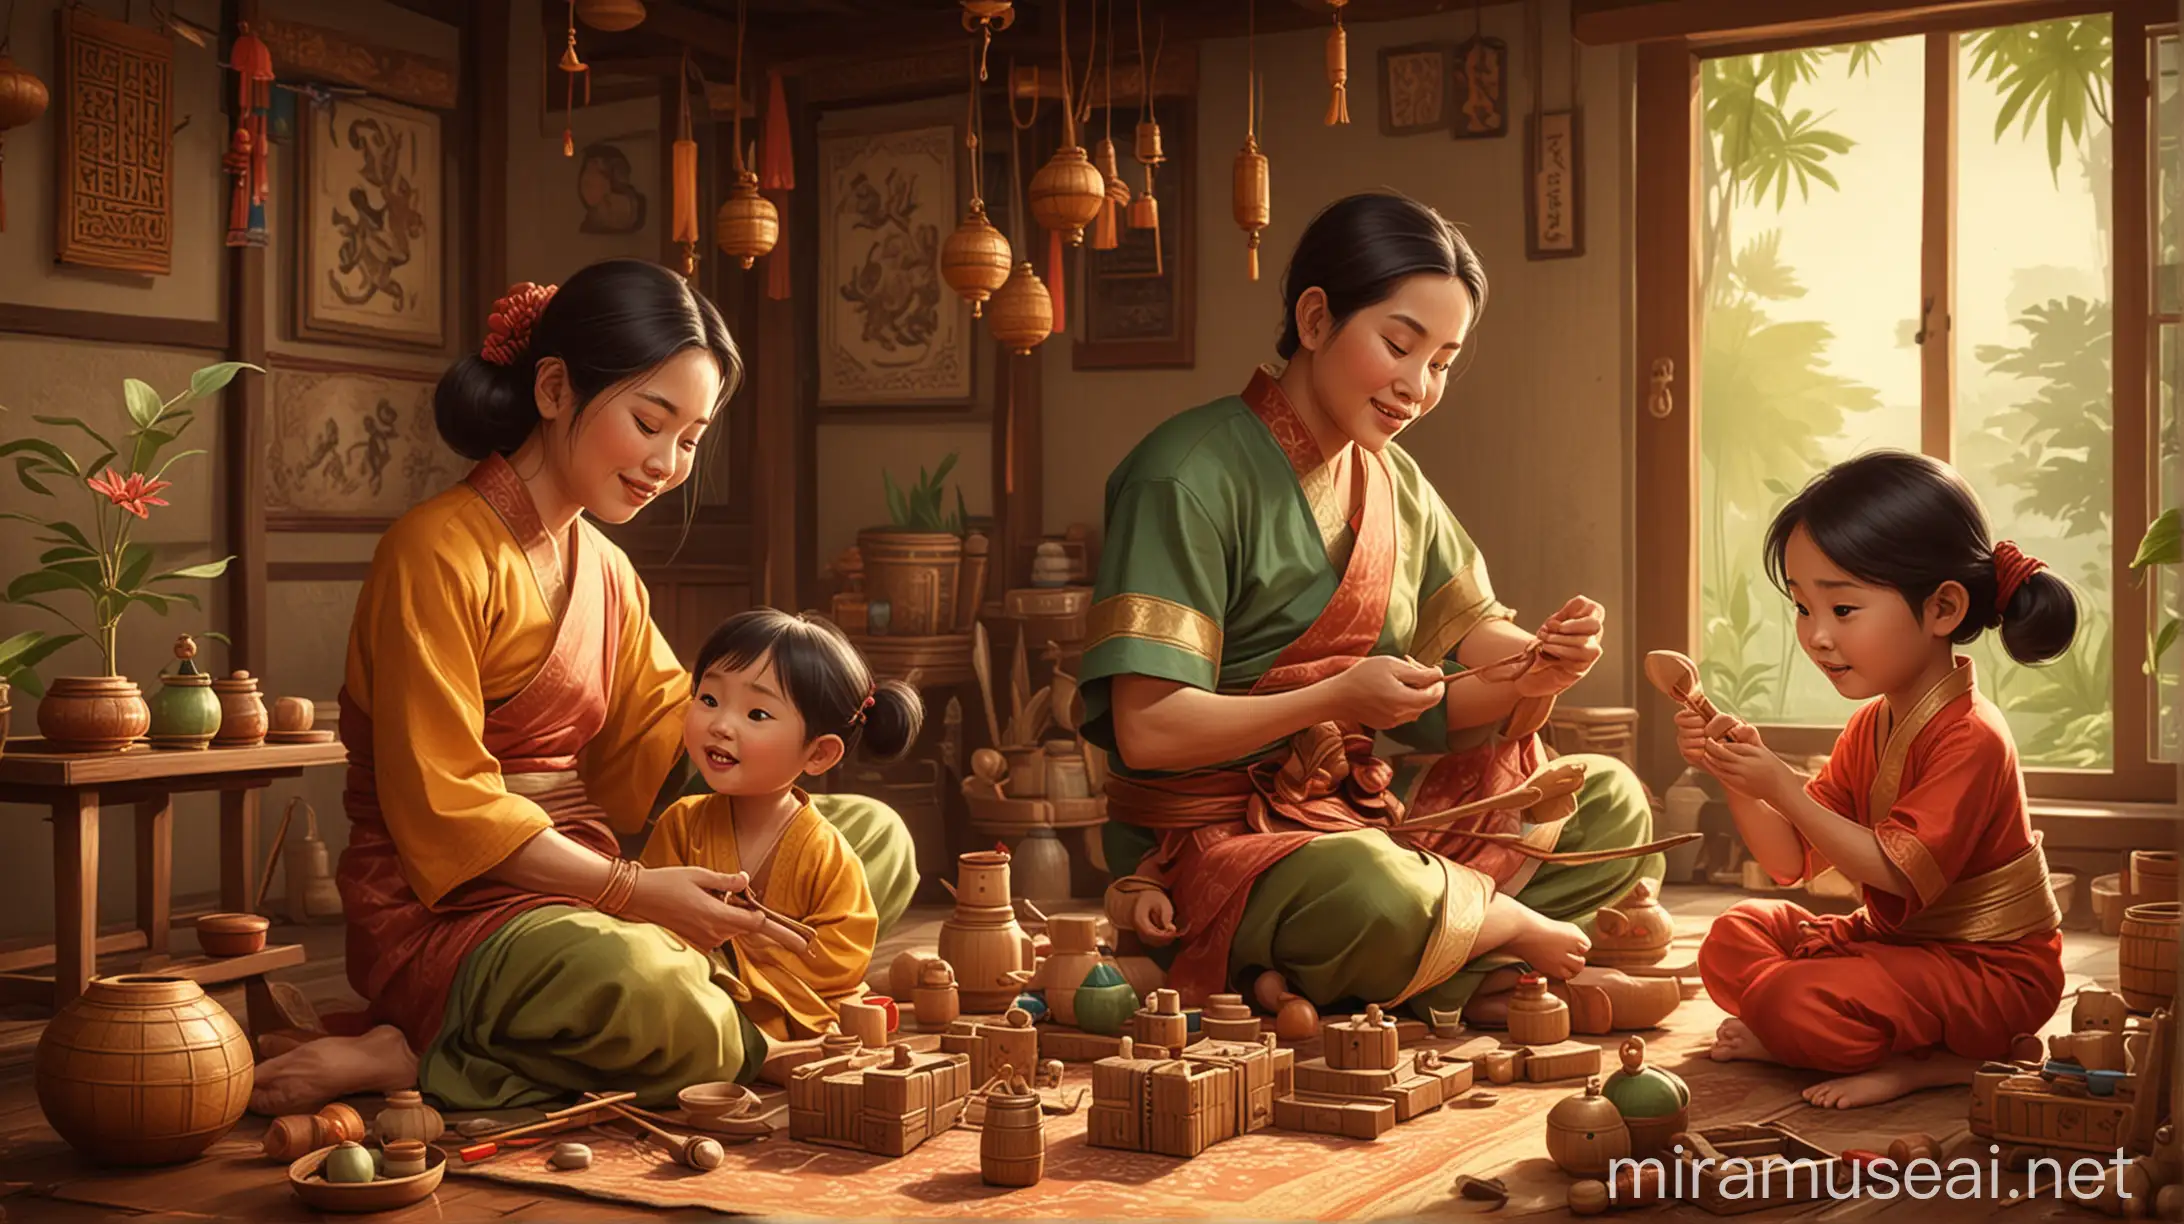 cartoon illustration of a harmonious Southeast Asian family playing with traditional toys. create a more dramatic and detailed illustration.